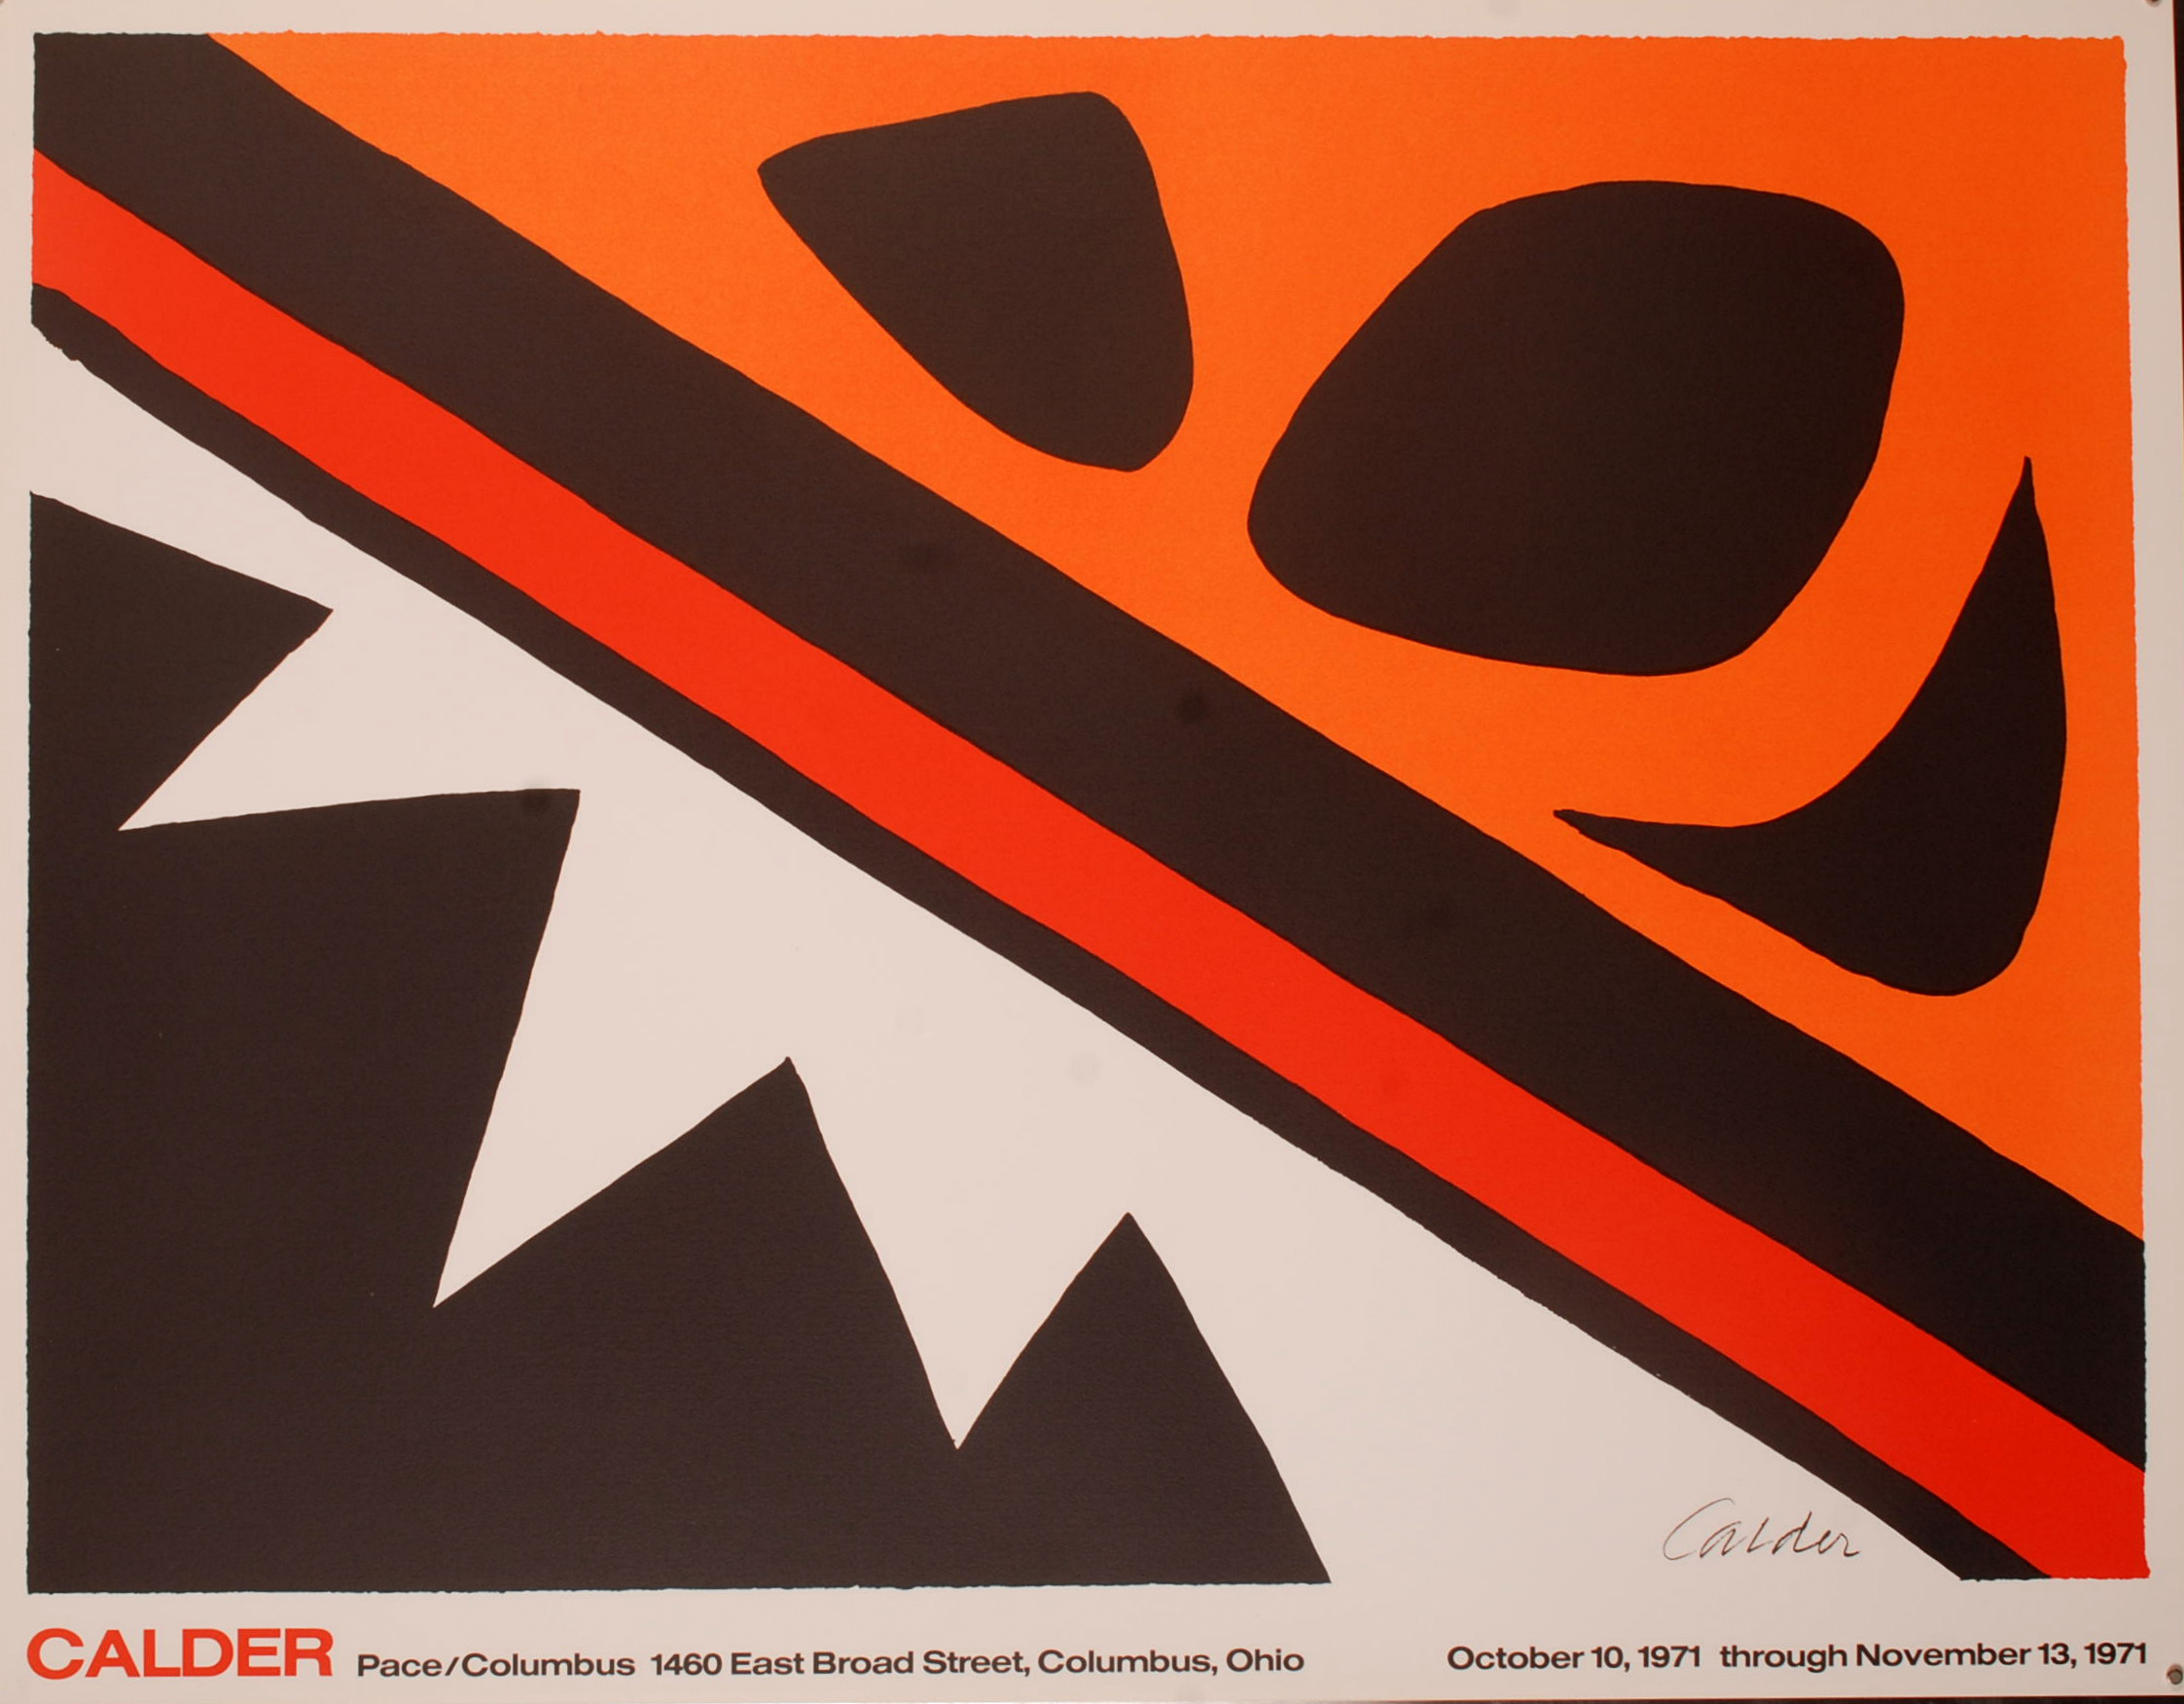 ALEXANDER CALDER
La Grenouille et Cie
Lithograph in colours
1971
Signed in the stone
63.5 x 81.